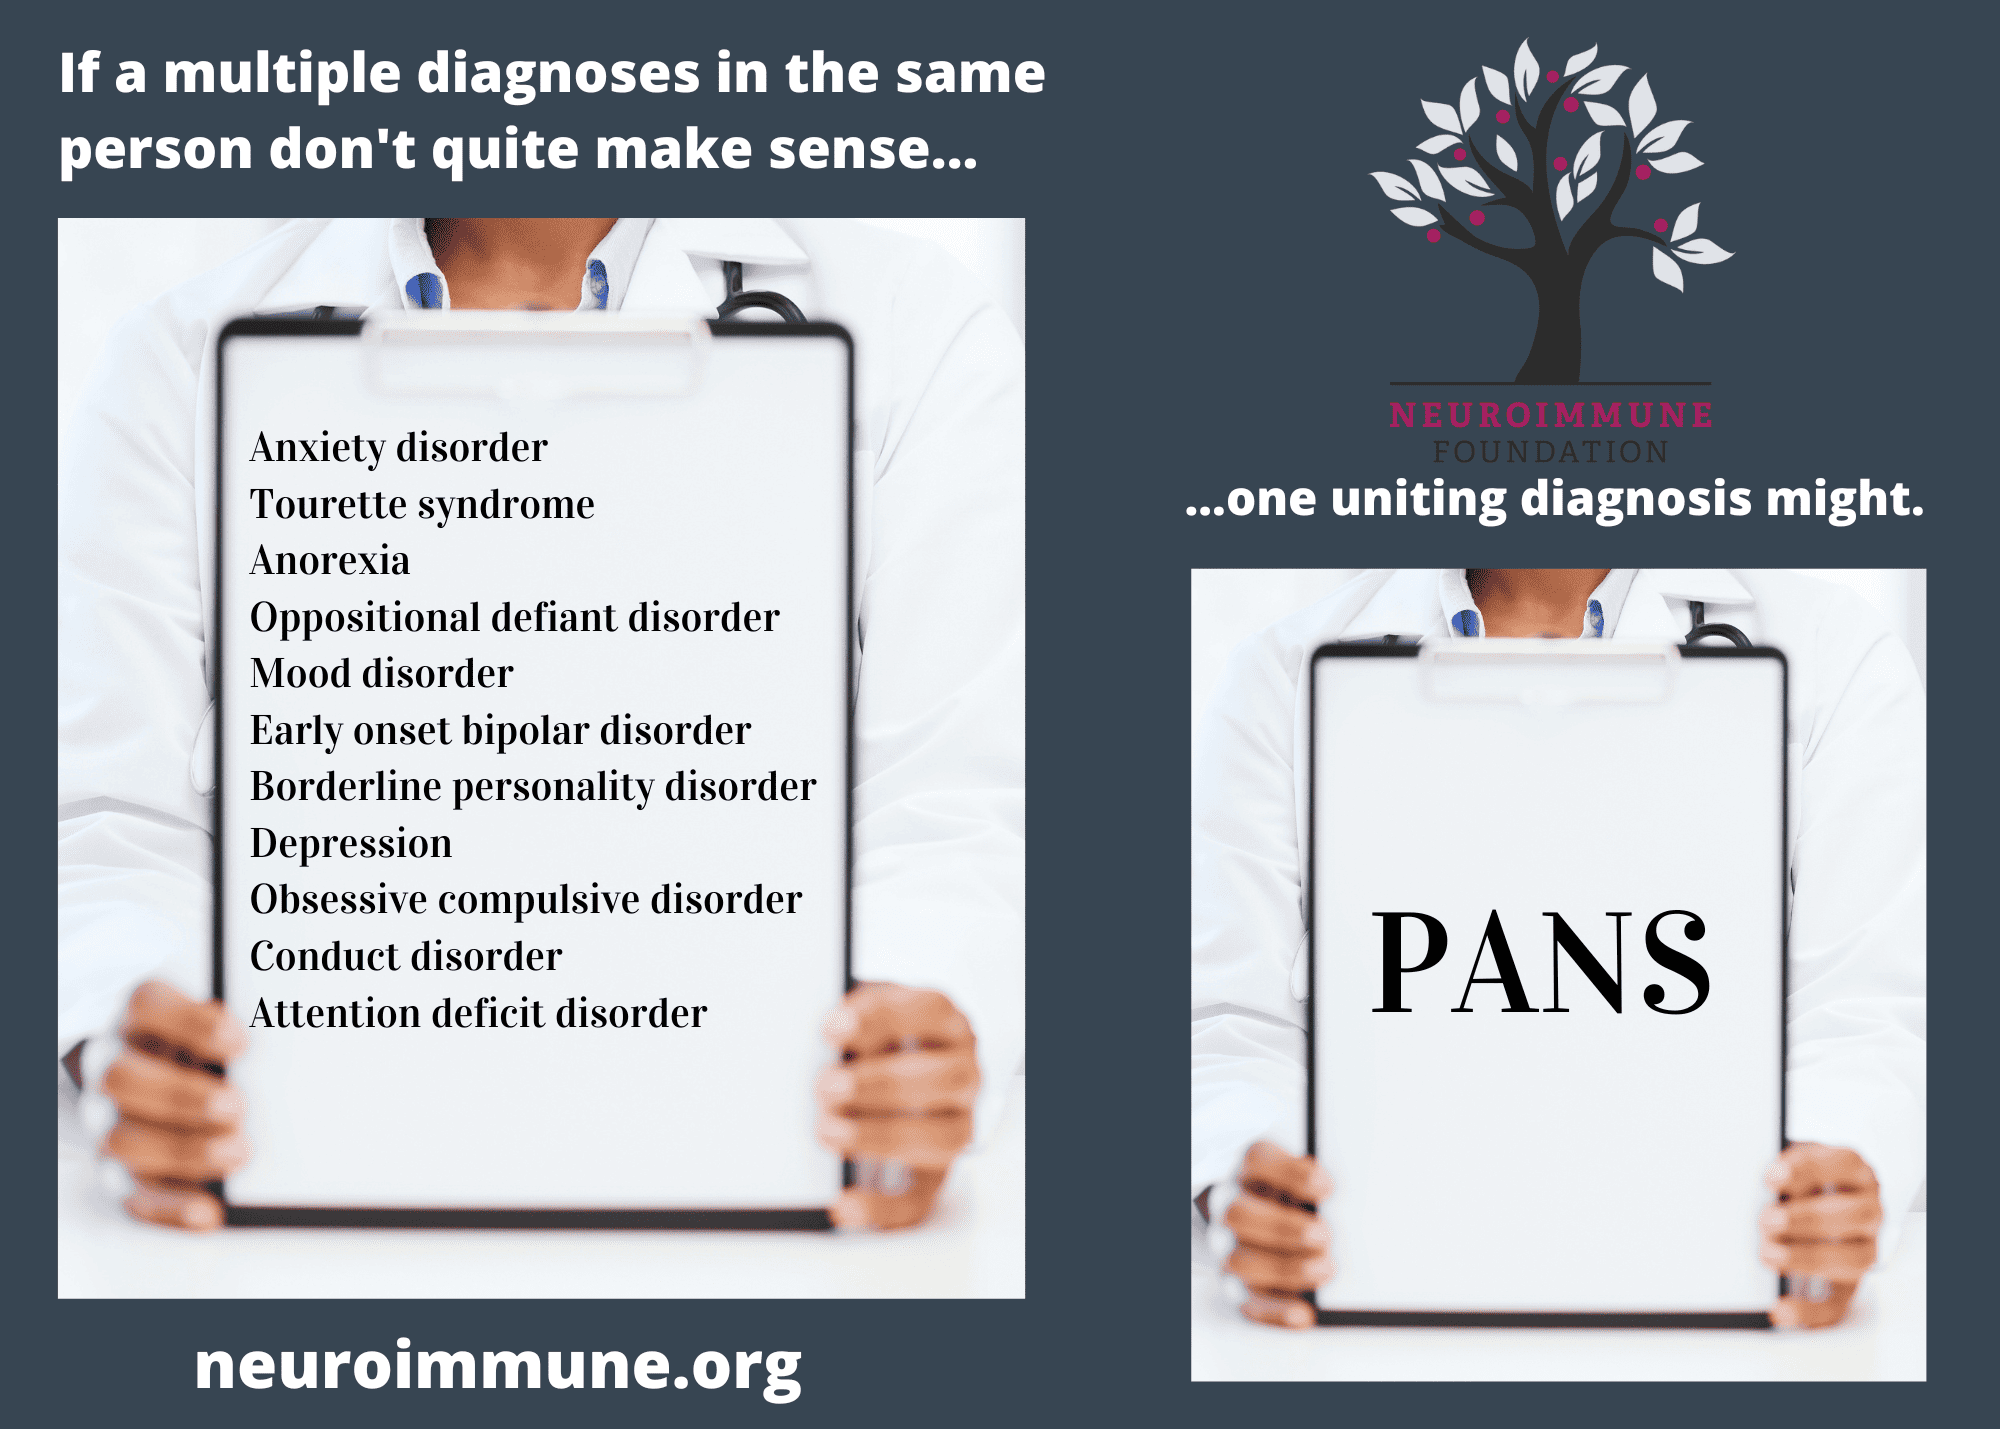 The heading: If multiple diagnoses in the same person don't quite make sense... appears above a clinician holding a white board with the list: Anxiety disorder, Tourette syndrome, Anorexia, Oppositional defiant disorder, Mood disorder, Early onset bipolar disorder, Borderline personality disorder, Depression, Obsessive compulsive disorder, Conduct disorder, Attention deficit disorder. The heading: ...one uniting diagnosis might." appears above a clinician holding a white board with the text: PANS. neuroimmune.org. The Neuroimmune Foundation logo of a tree with magenta fruit is in the upper right corner.